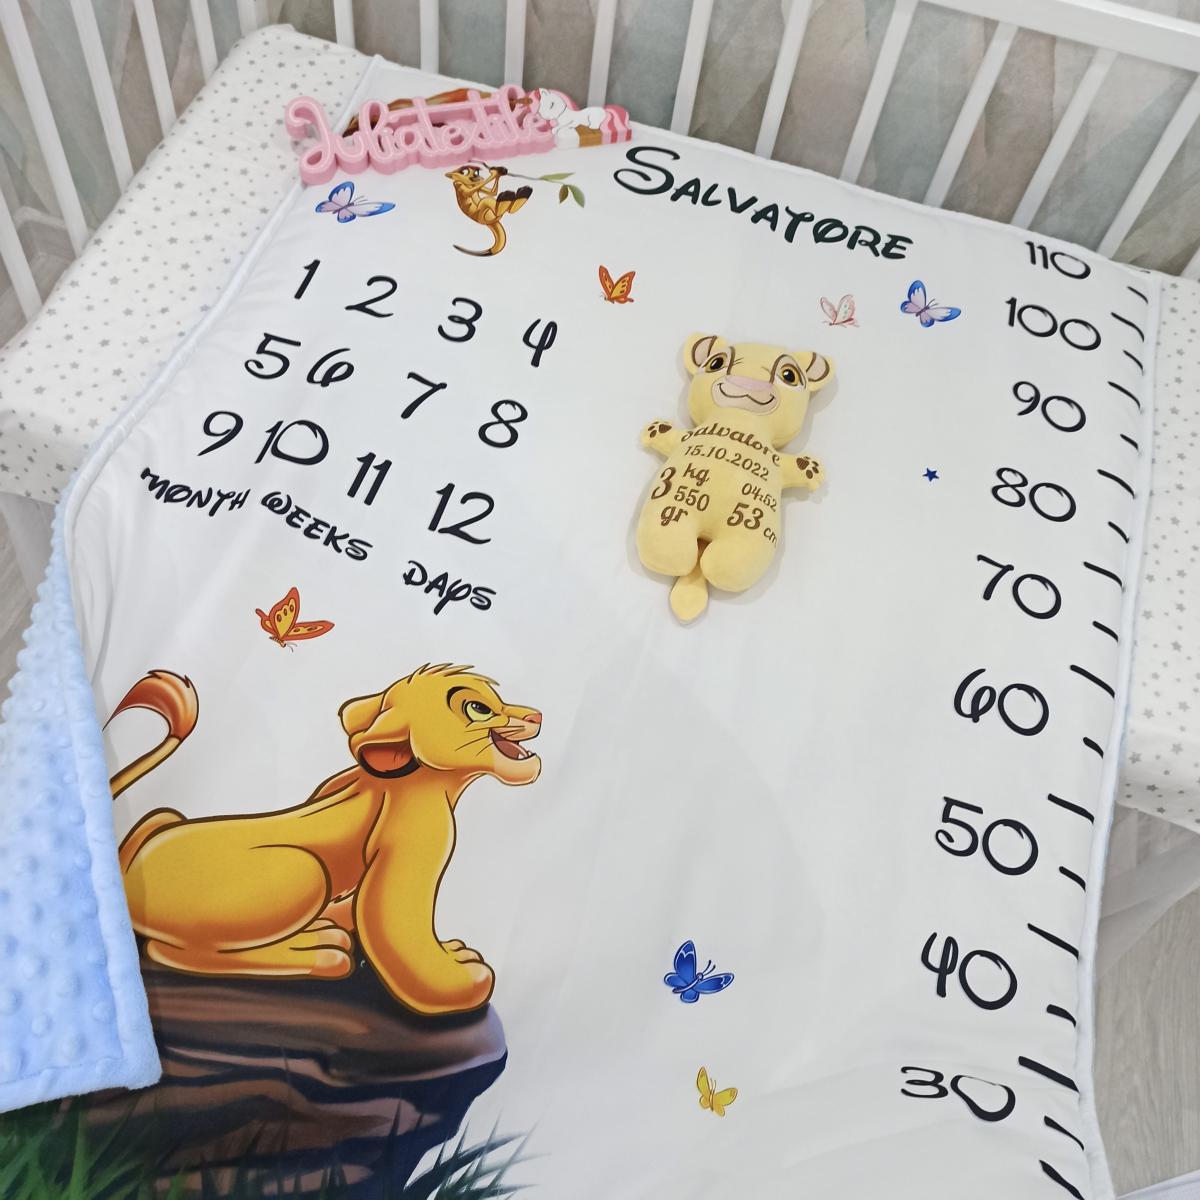 Reversible blanket with yellow and white lion king birth month print